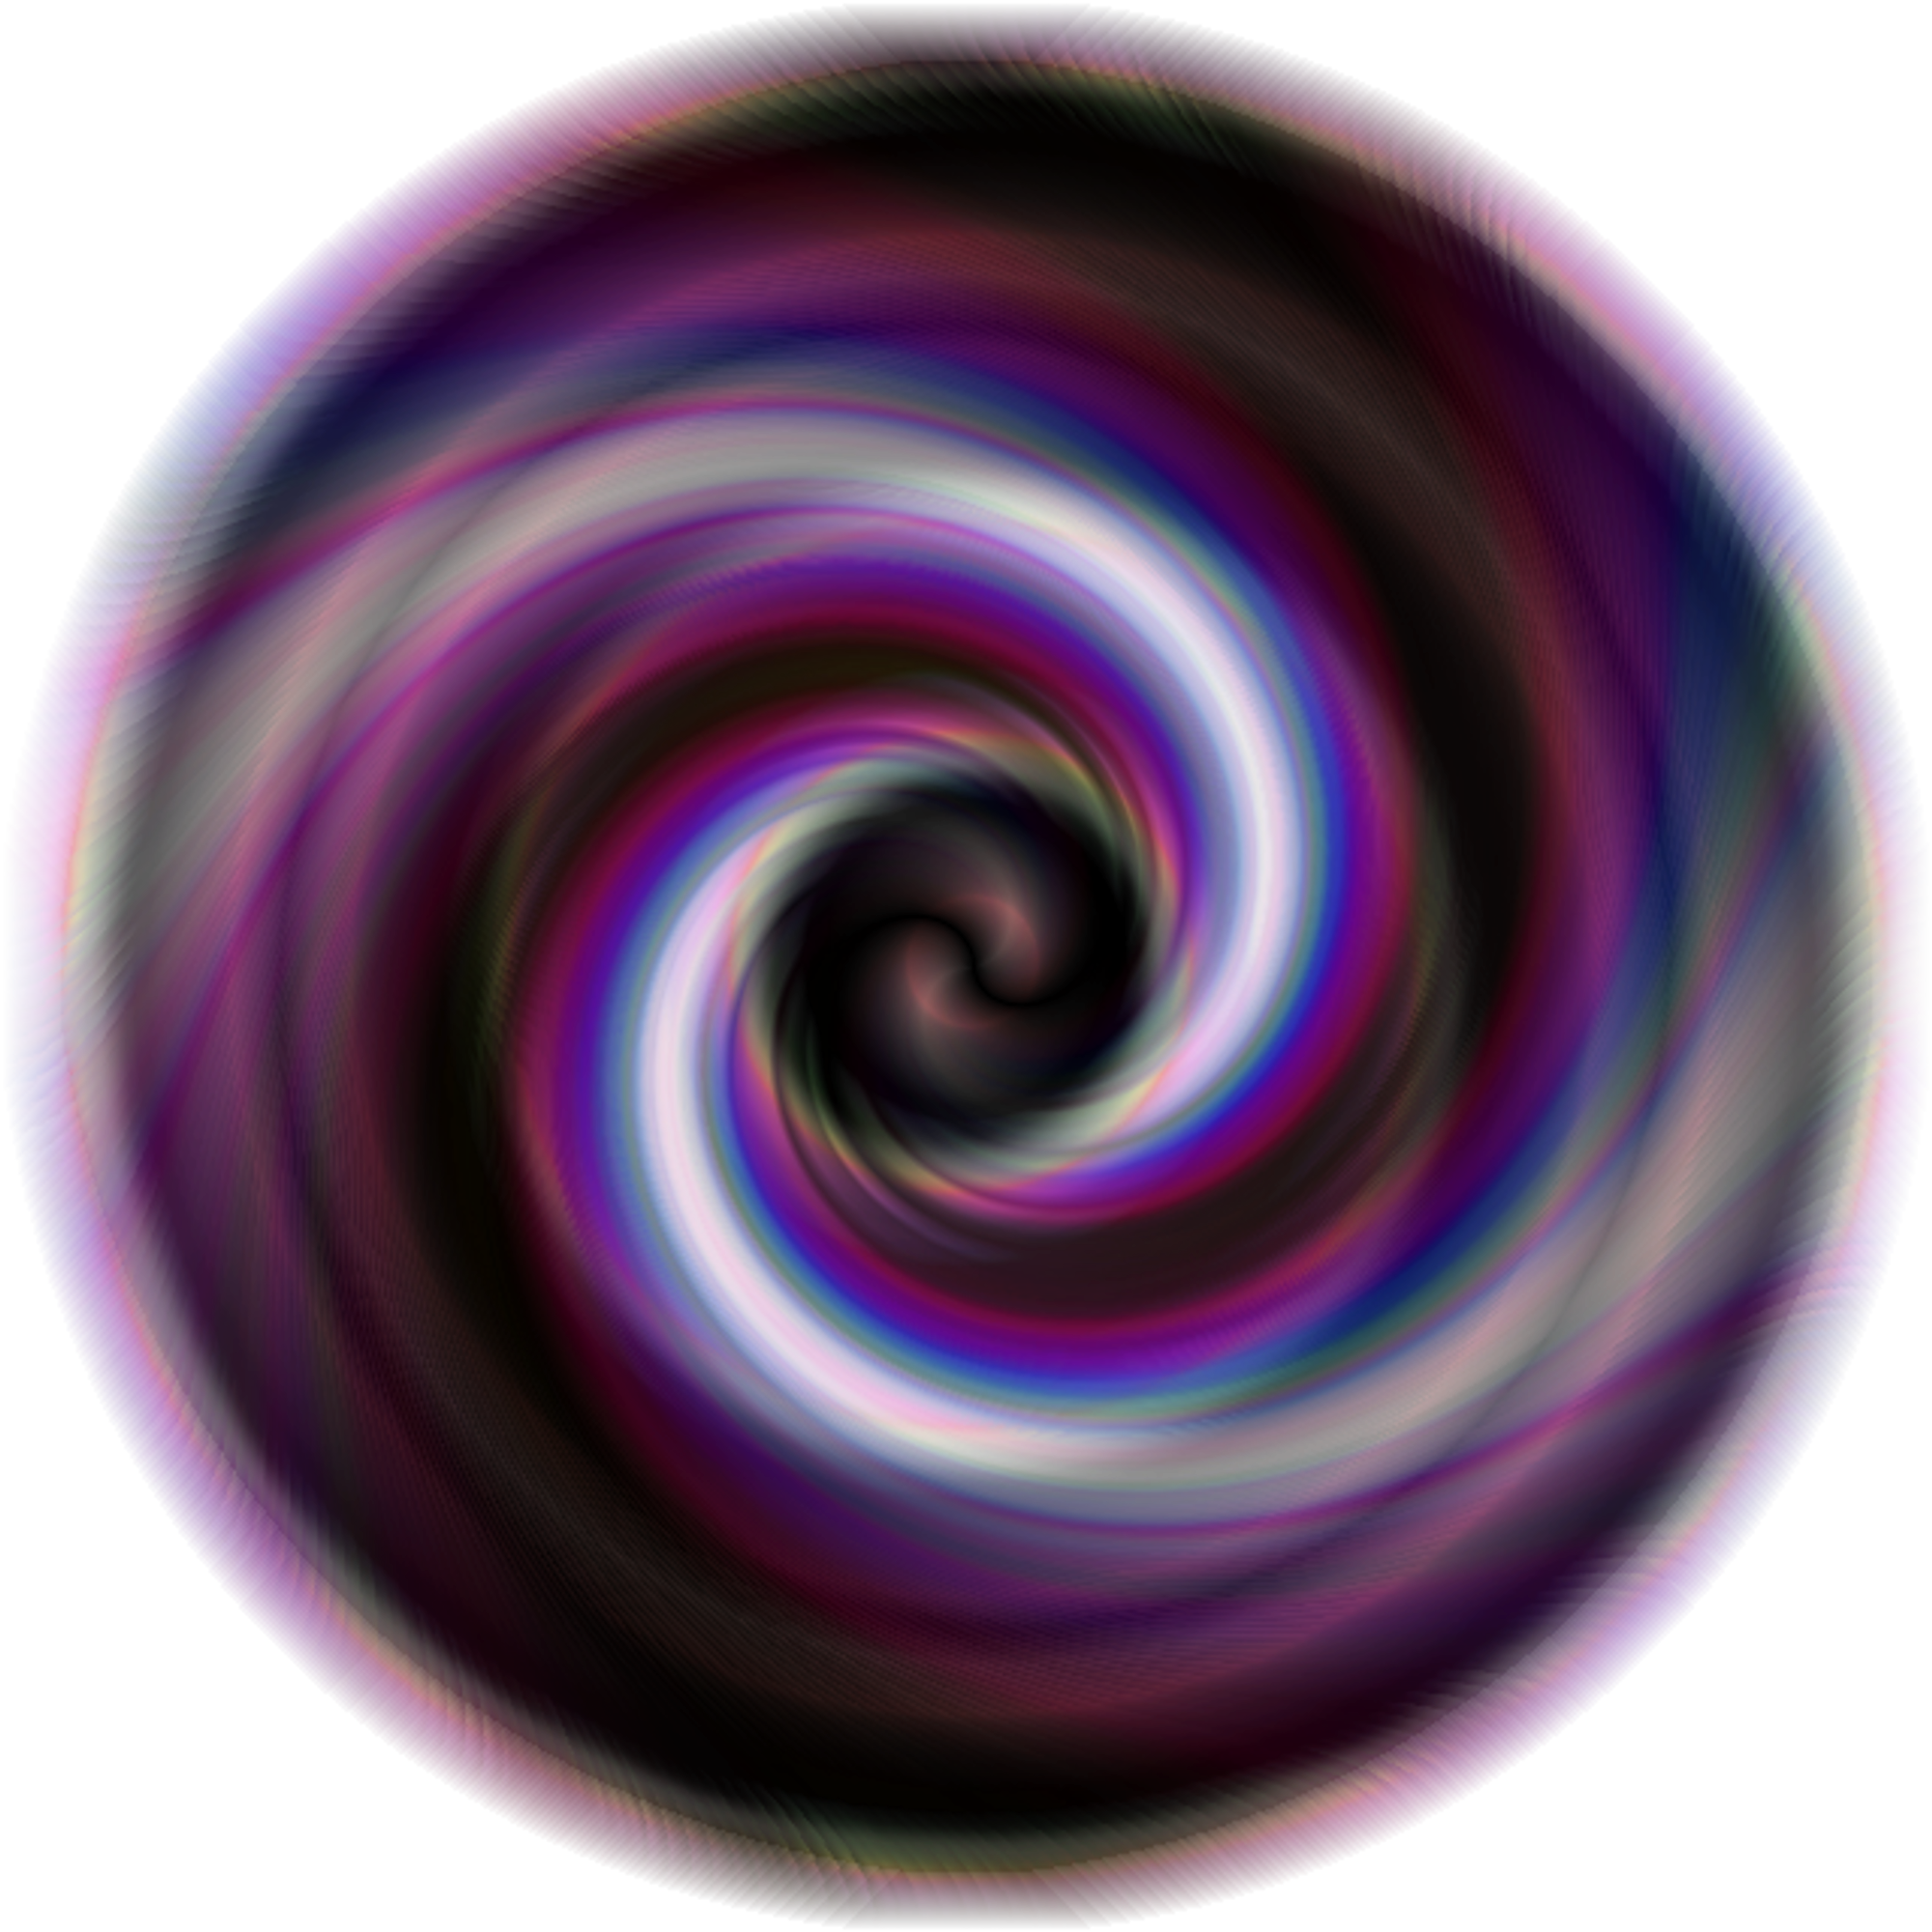 Swirl PNG, Swirl Transparent Background - FreeIconsPNG